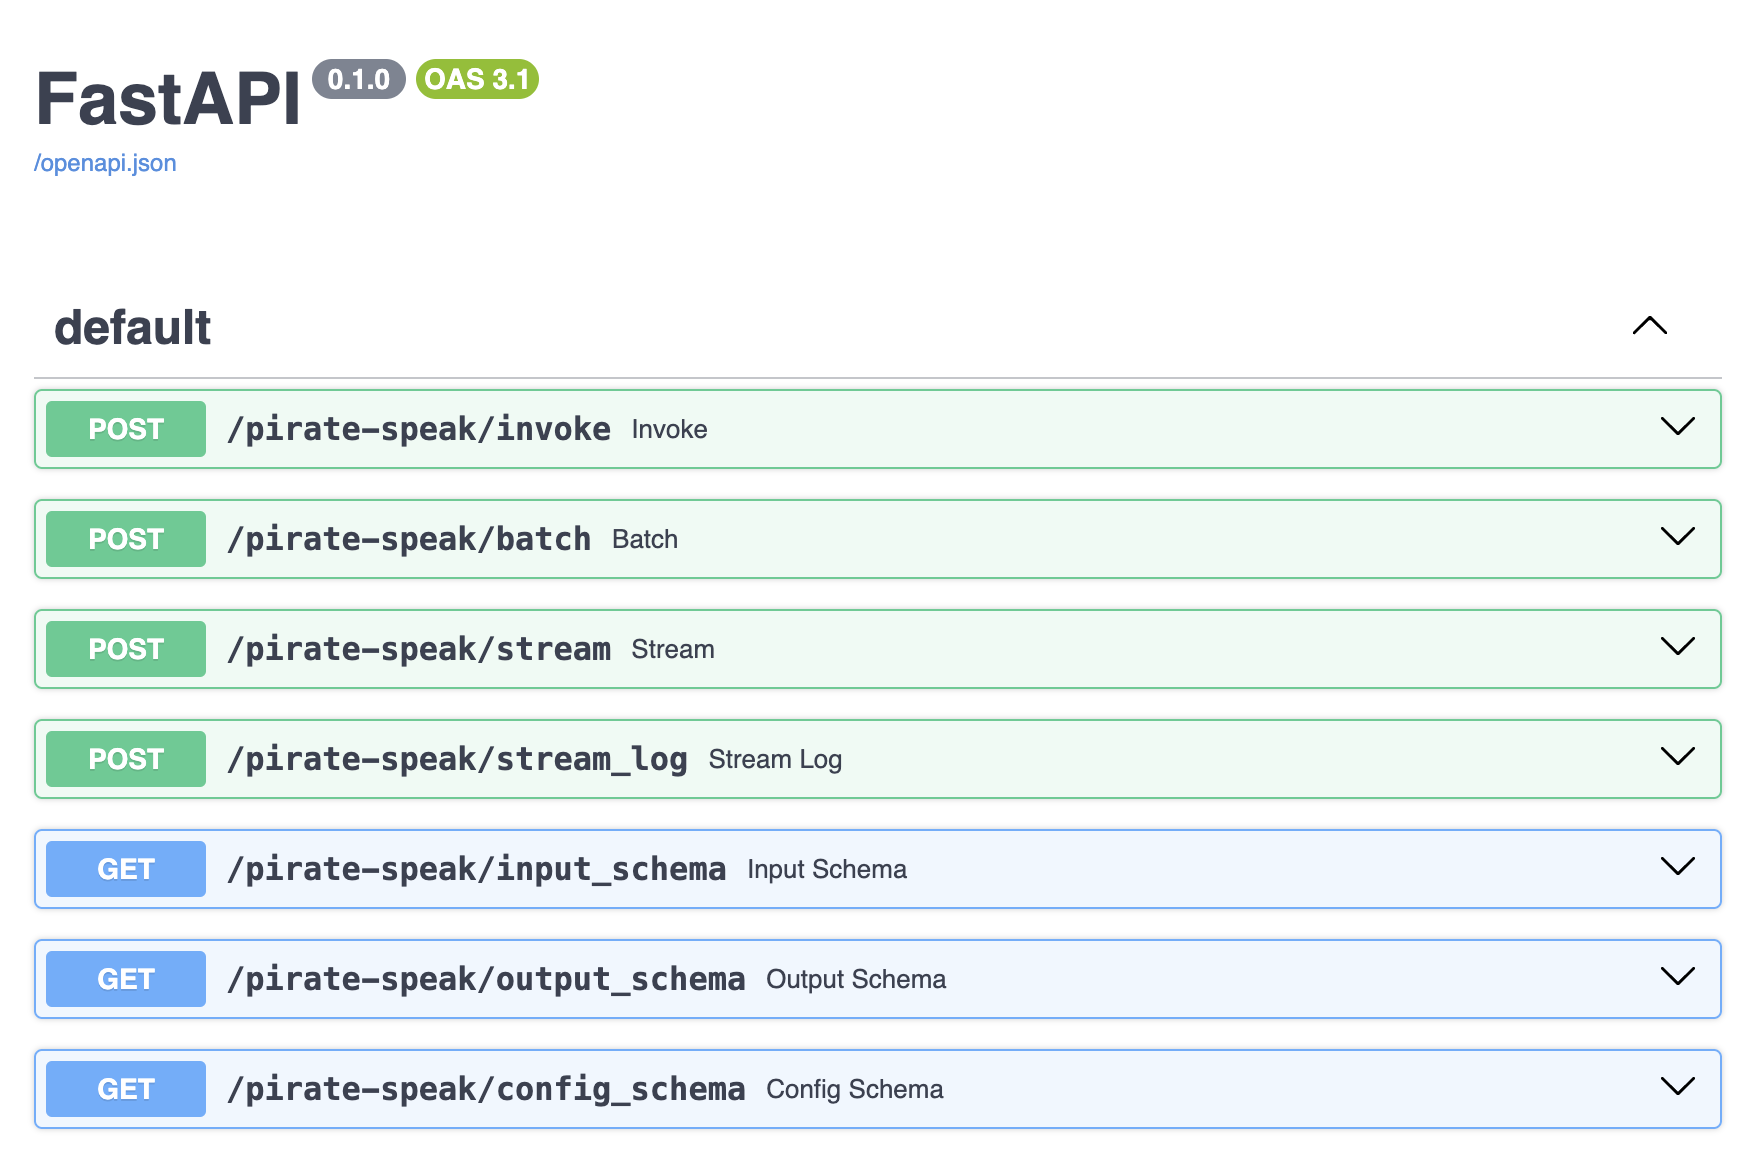 Screenshot of the API documentation interface showing available endpoints for the pirate-speak application.